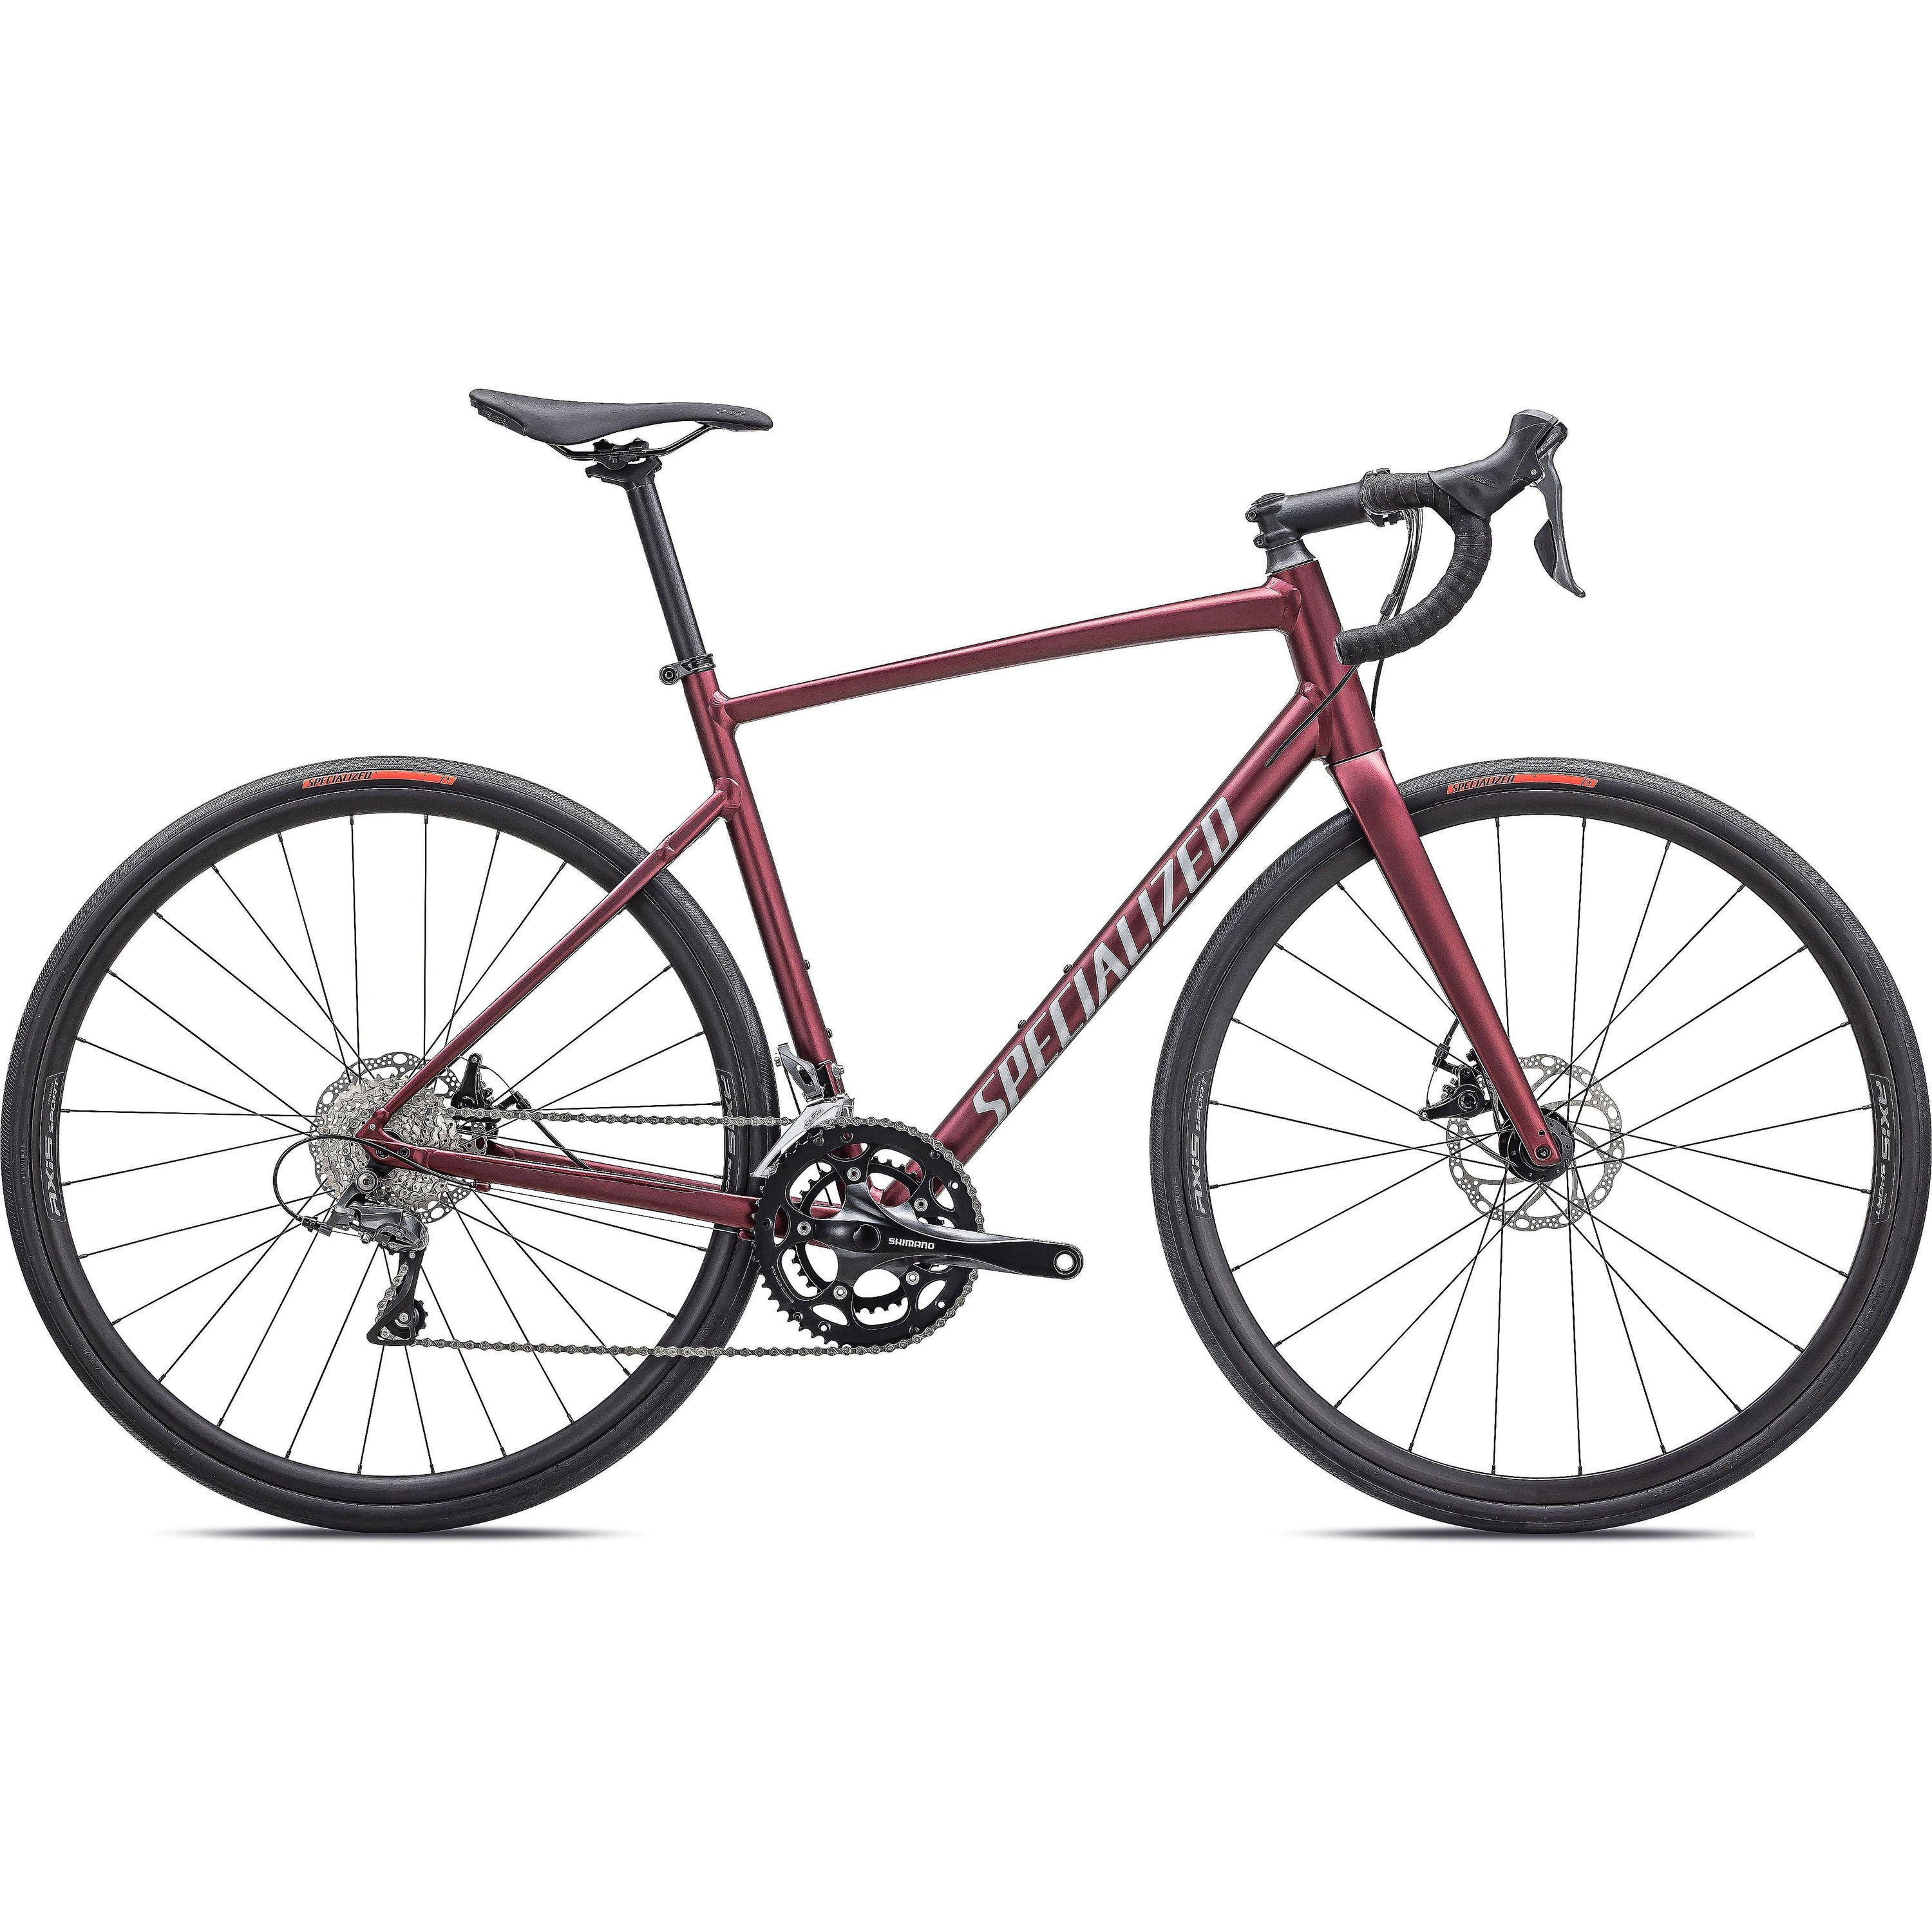 Specialized Allez Disc - Satin Maroon/Silver Dust/Flo Red